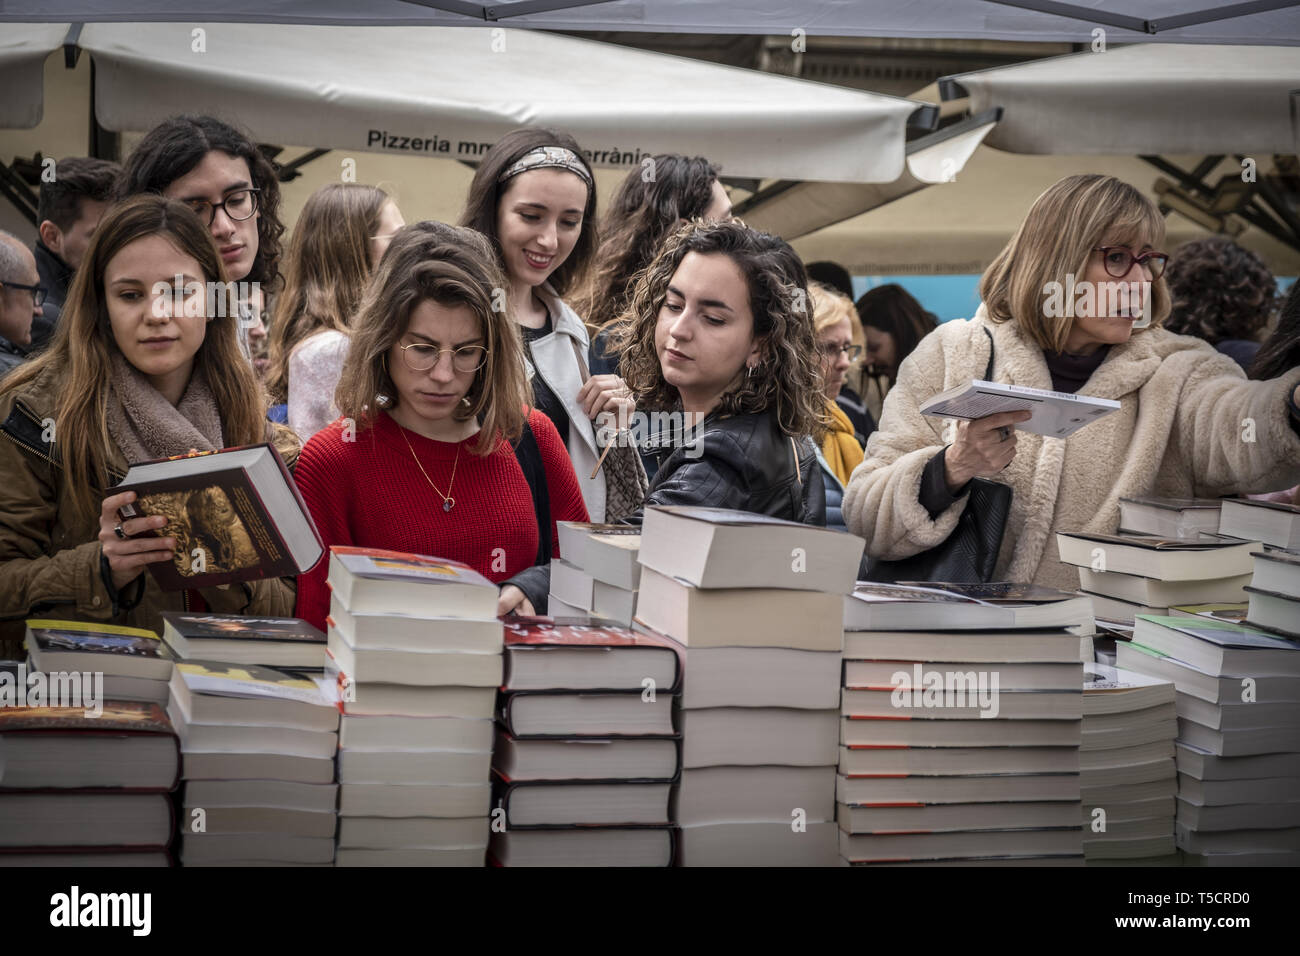 Barcelona, Catalonia, Spain. 23rd Apr, 2019. A group of women are seen looking at some of the books displayed for sale during the Sant Jordi day celebration.The festivity of Sant Jordi is celebrated in conjunction with Book Day and the Fair of Roses, symbols of culture and love. Knight Saint Jordi died on April 23, 303.The cult of Saint Jordi was established in Catalonia during the 8th century but it is at the end of the 19th century, with the Catalan Renaixença that installed as the most celebrated patriotic, civic and cultural day in Catalonia. The streets of the cities and towns of Ca Stock Photo